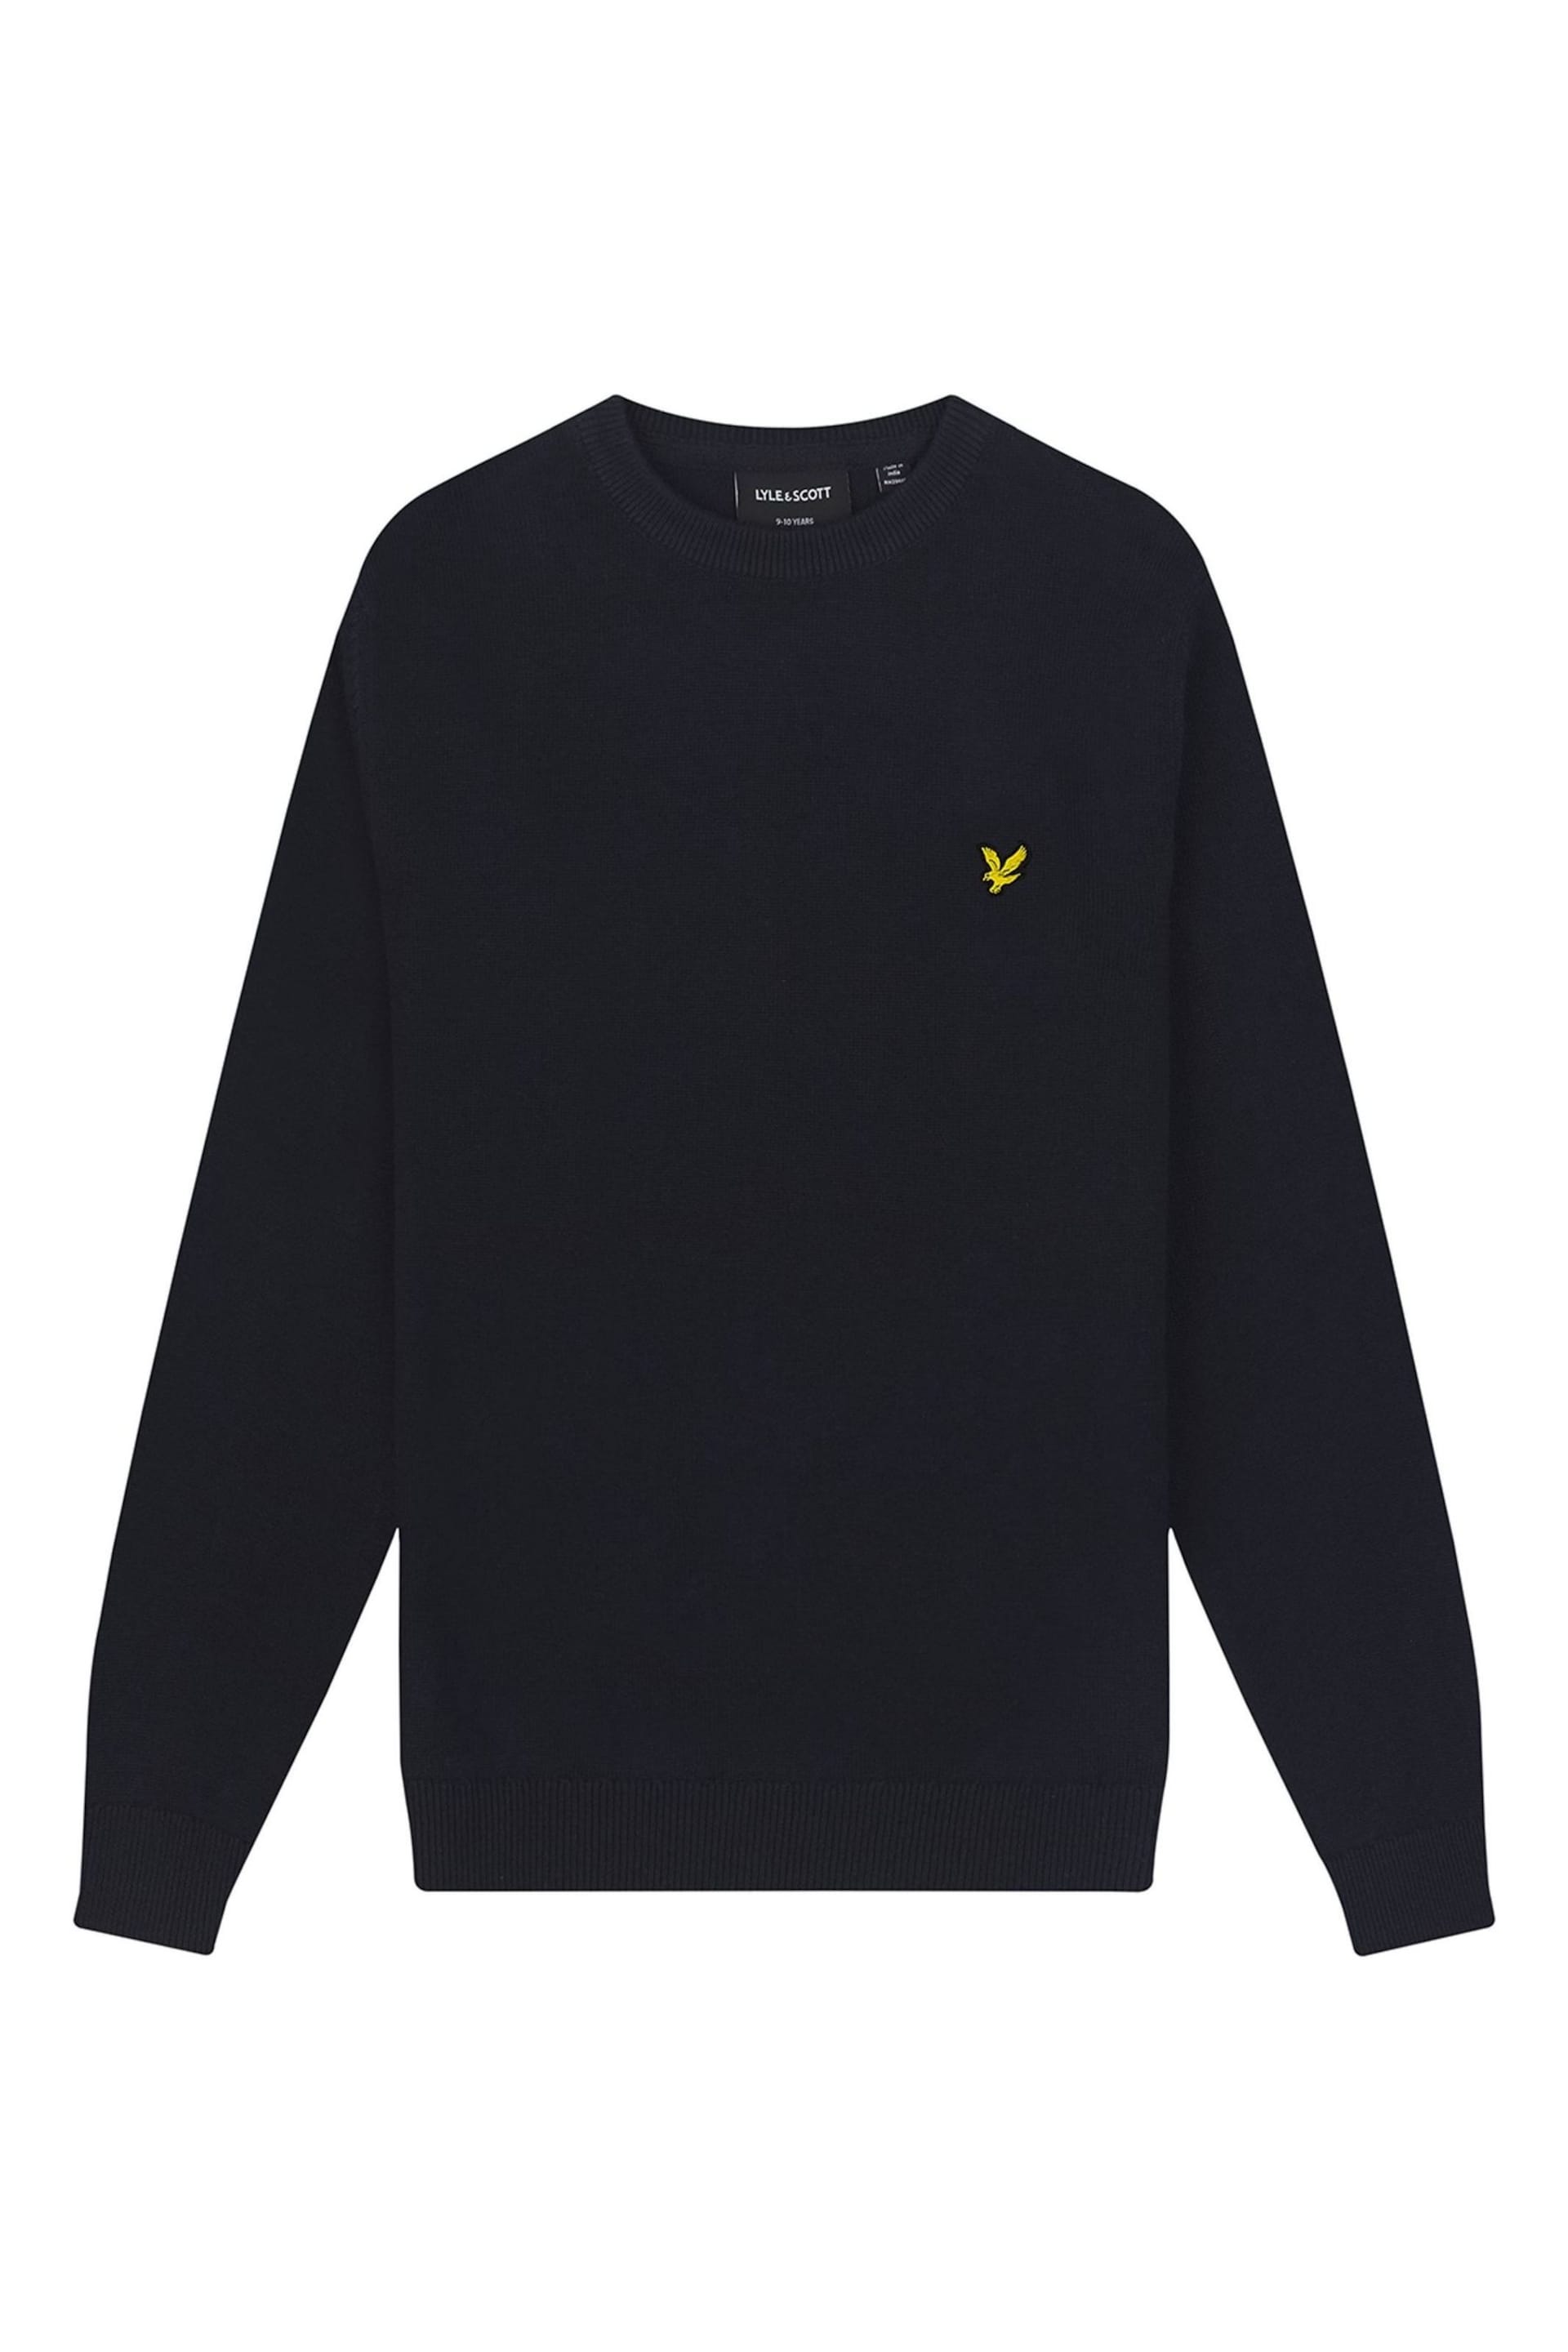 Lyle & Scott Boys Cotton Crew Neck Knitted Jumper - Image 3 of 3